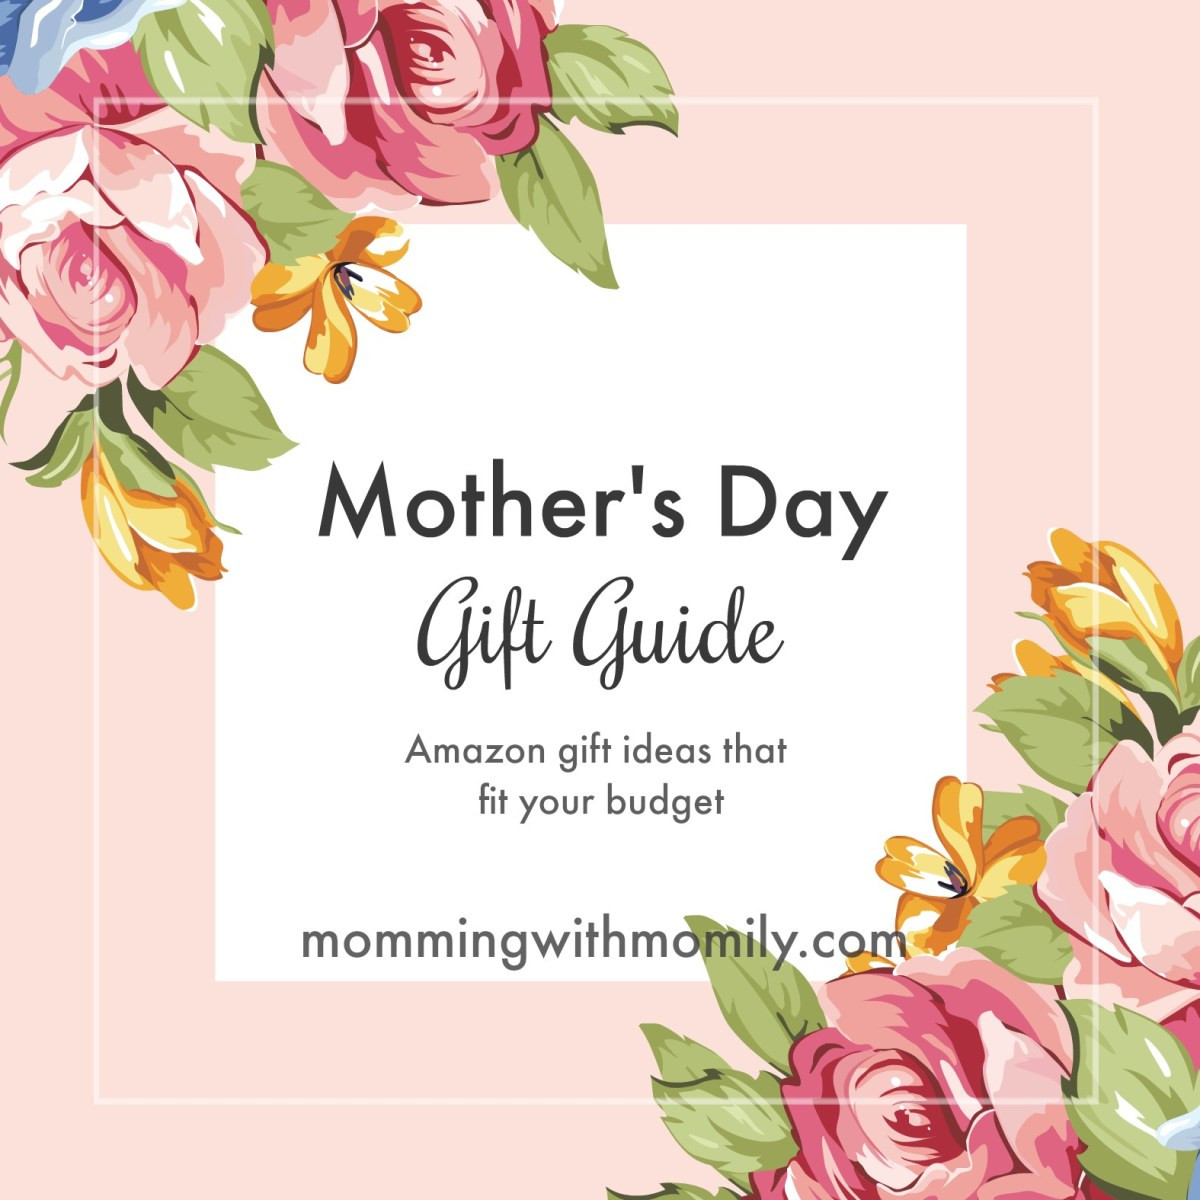 Mother'S Day Gift Ideas Amazon
 Mother s Day Gift Guide Amazon ideas for your bud